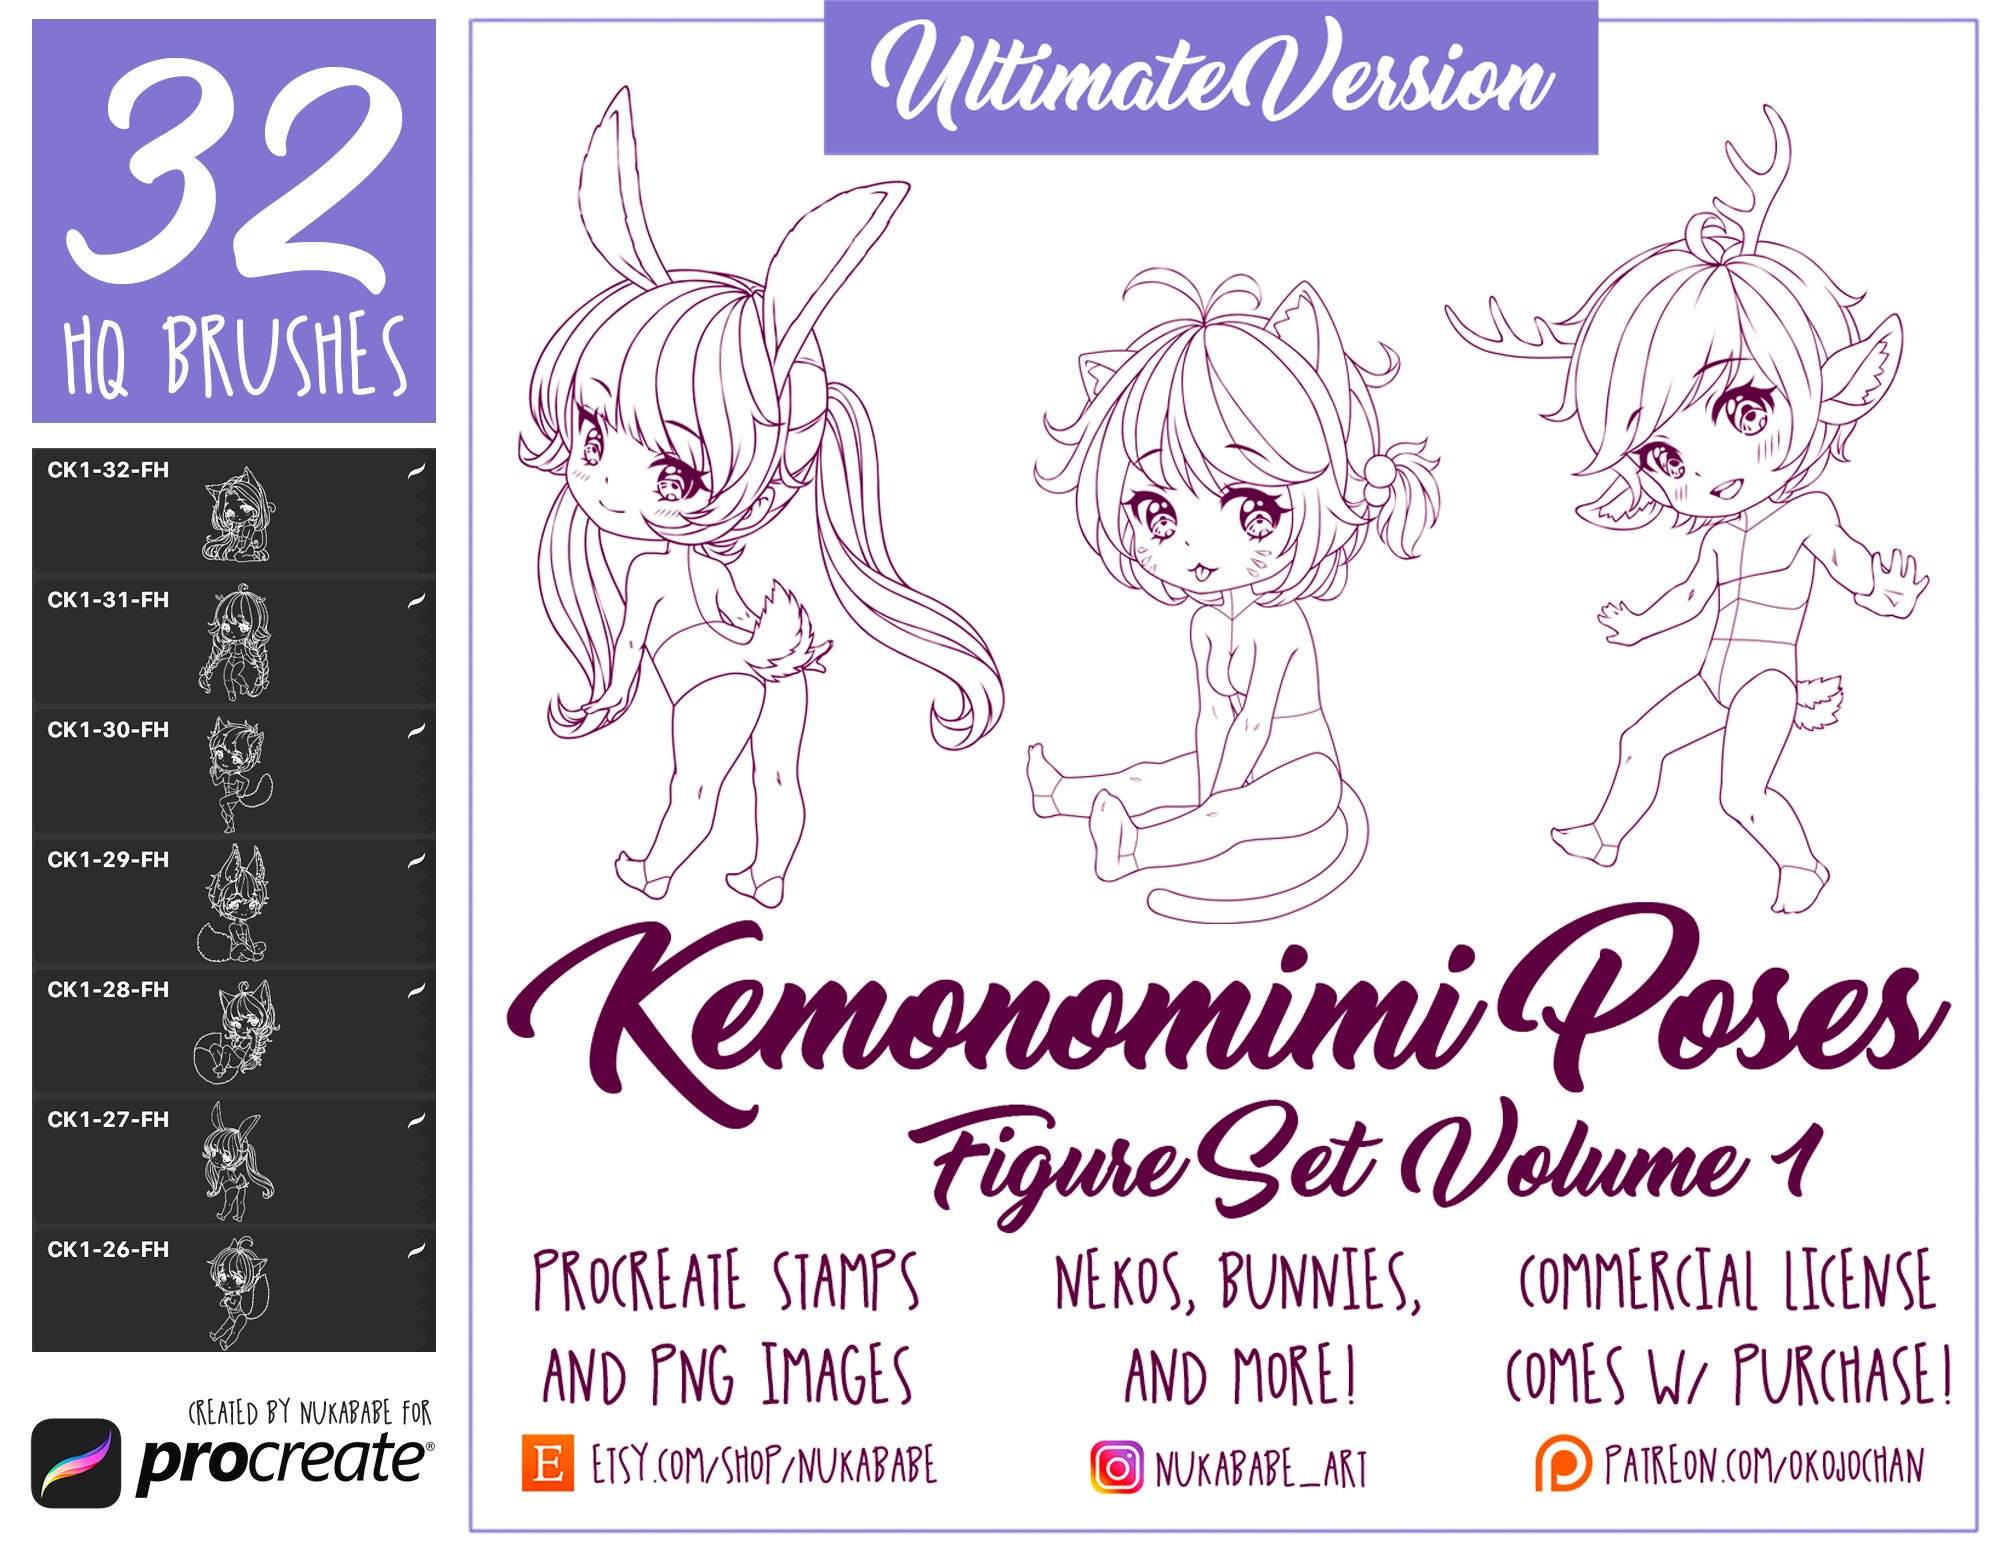 Procreate Chibi Poses Stamps, Couple Poses, Anime Figure Stamps, Manga  Poses With Eyes and Hair, Chibi Base, Guide Brushes, Valentine's Day 